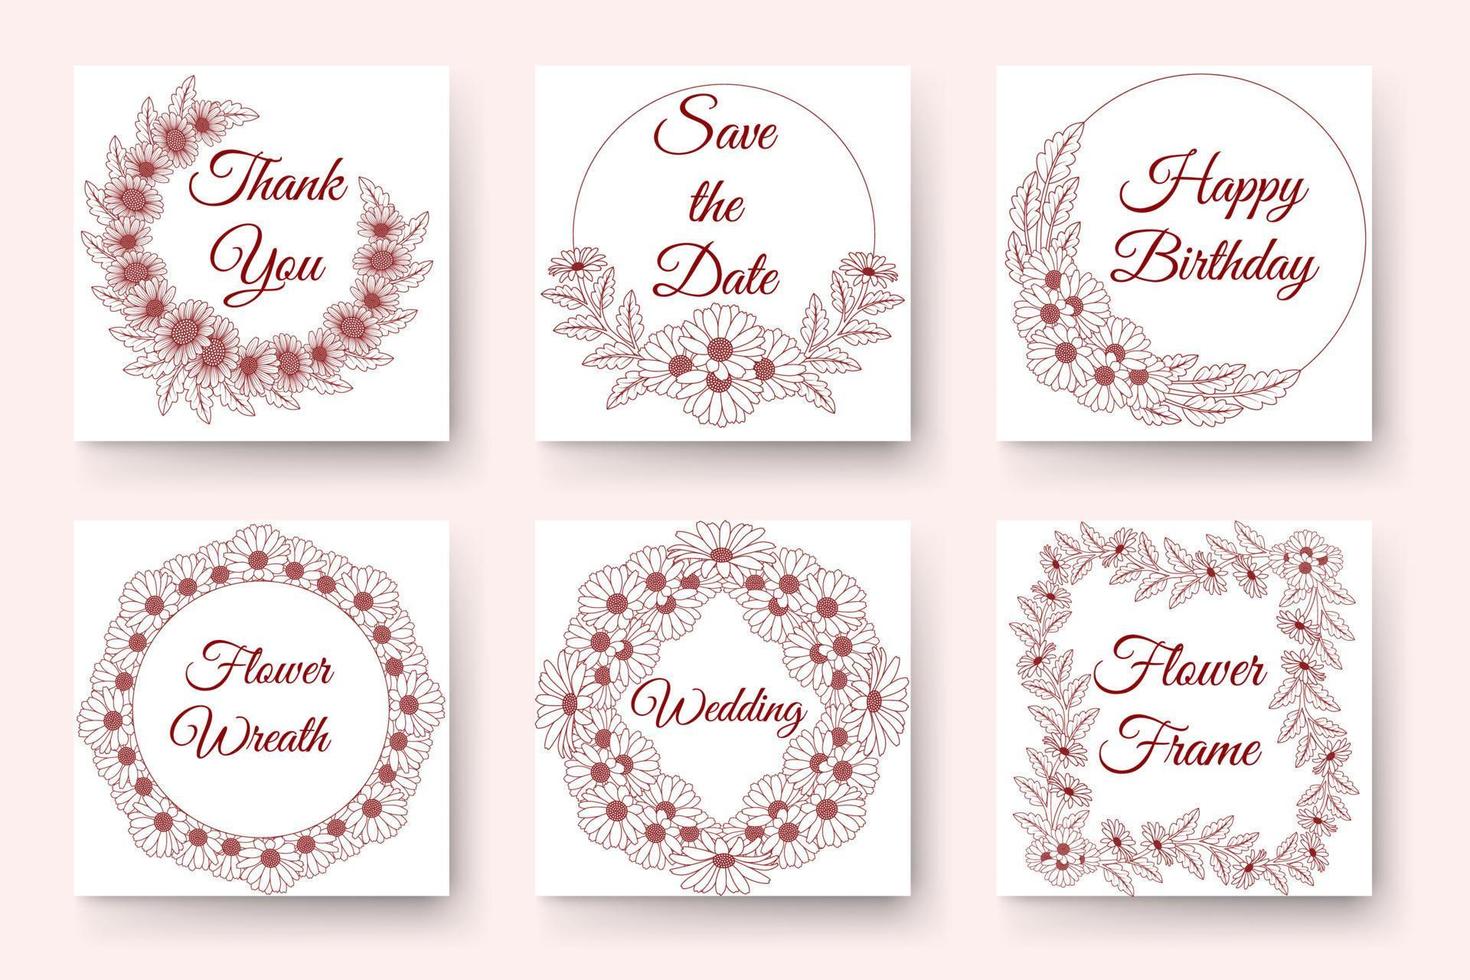 Hand drawn flower wreath design with floral elements for birthday new year wedding invitation Card vector